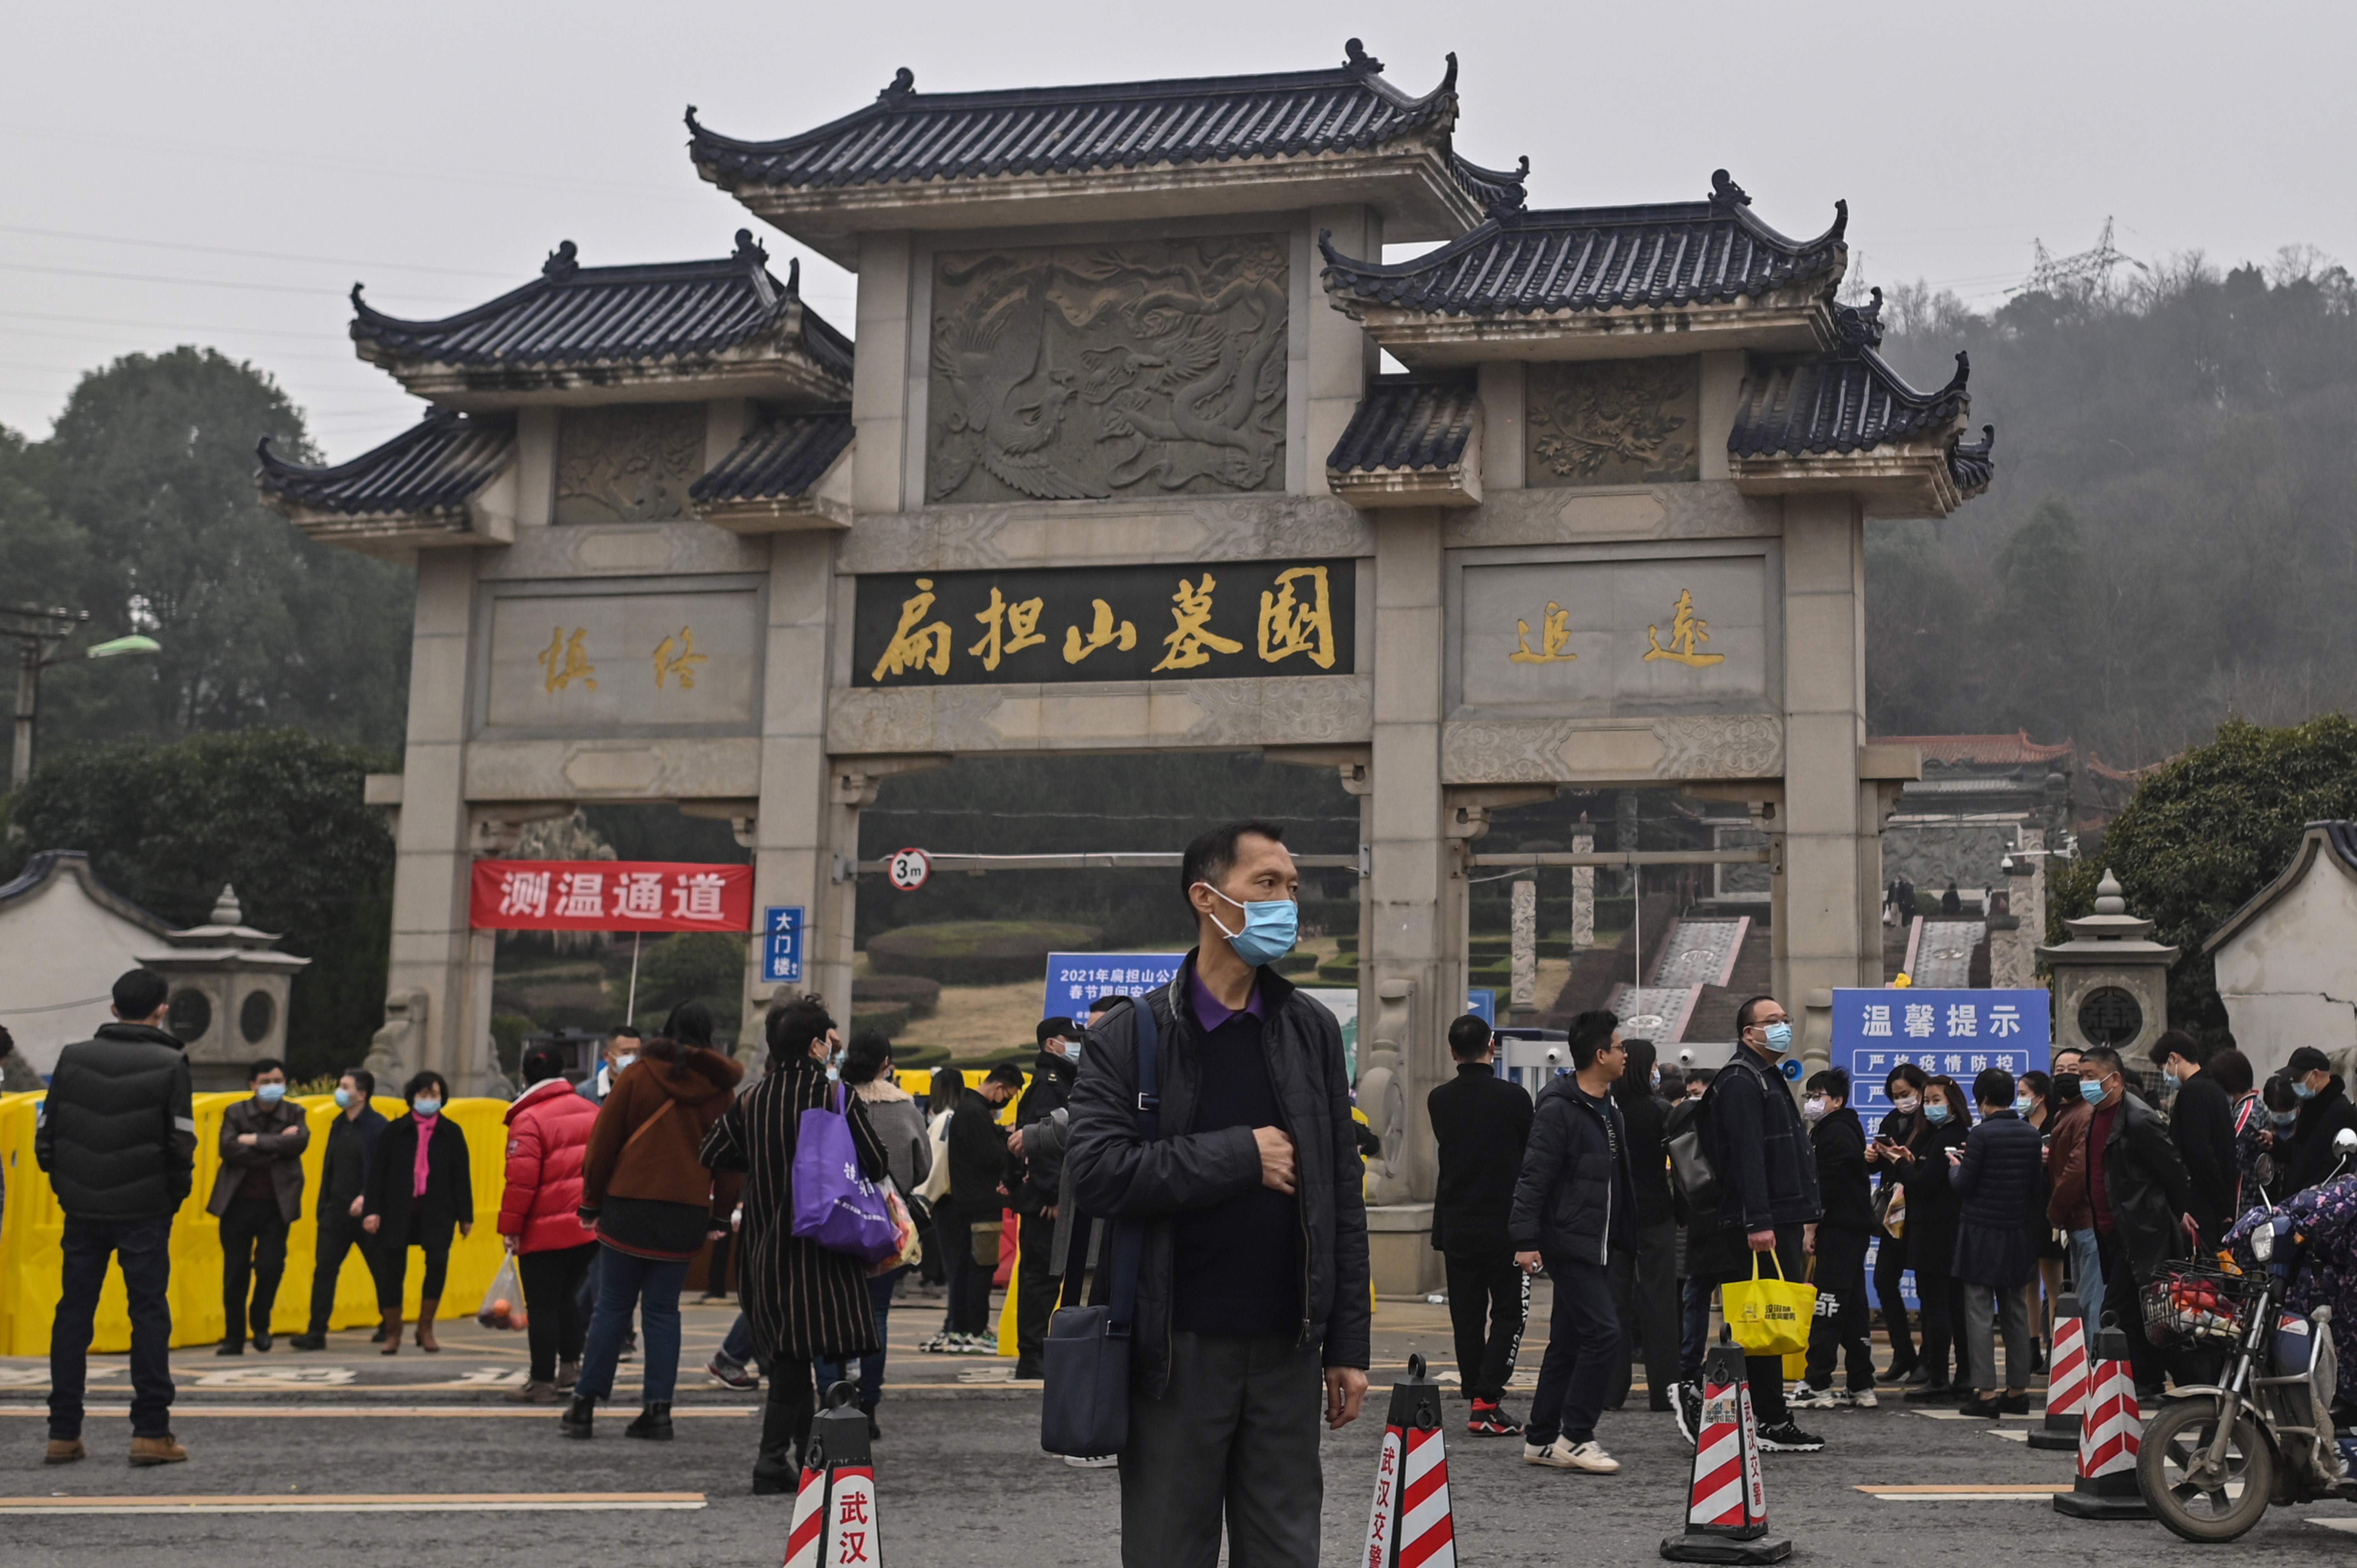 People are seen outside the Biandanshan cemetery in Wuhan, in China's central Hubei province on February 12, 2021, during the first day of the Lunar New Year, which ushers in the Year of the Ox. (Photo by Hector RETAMAL / AFP)